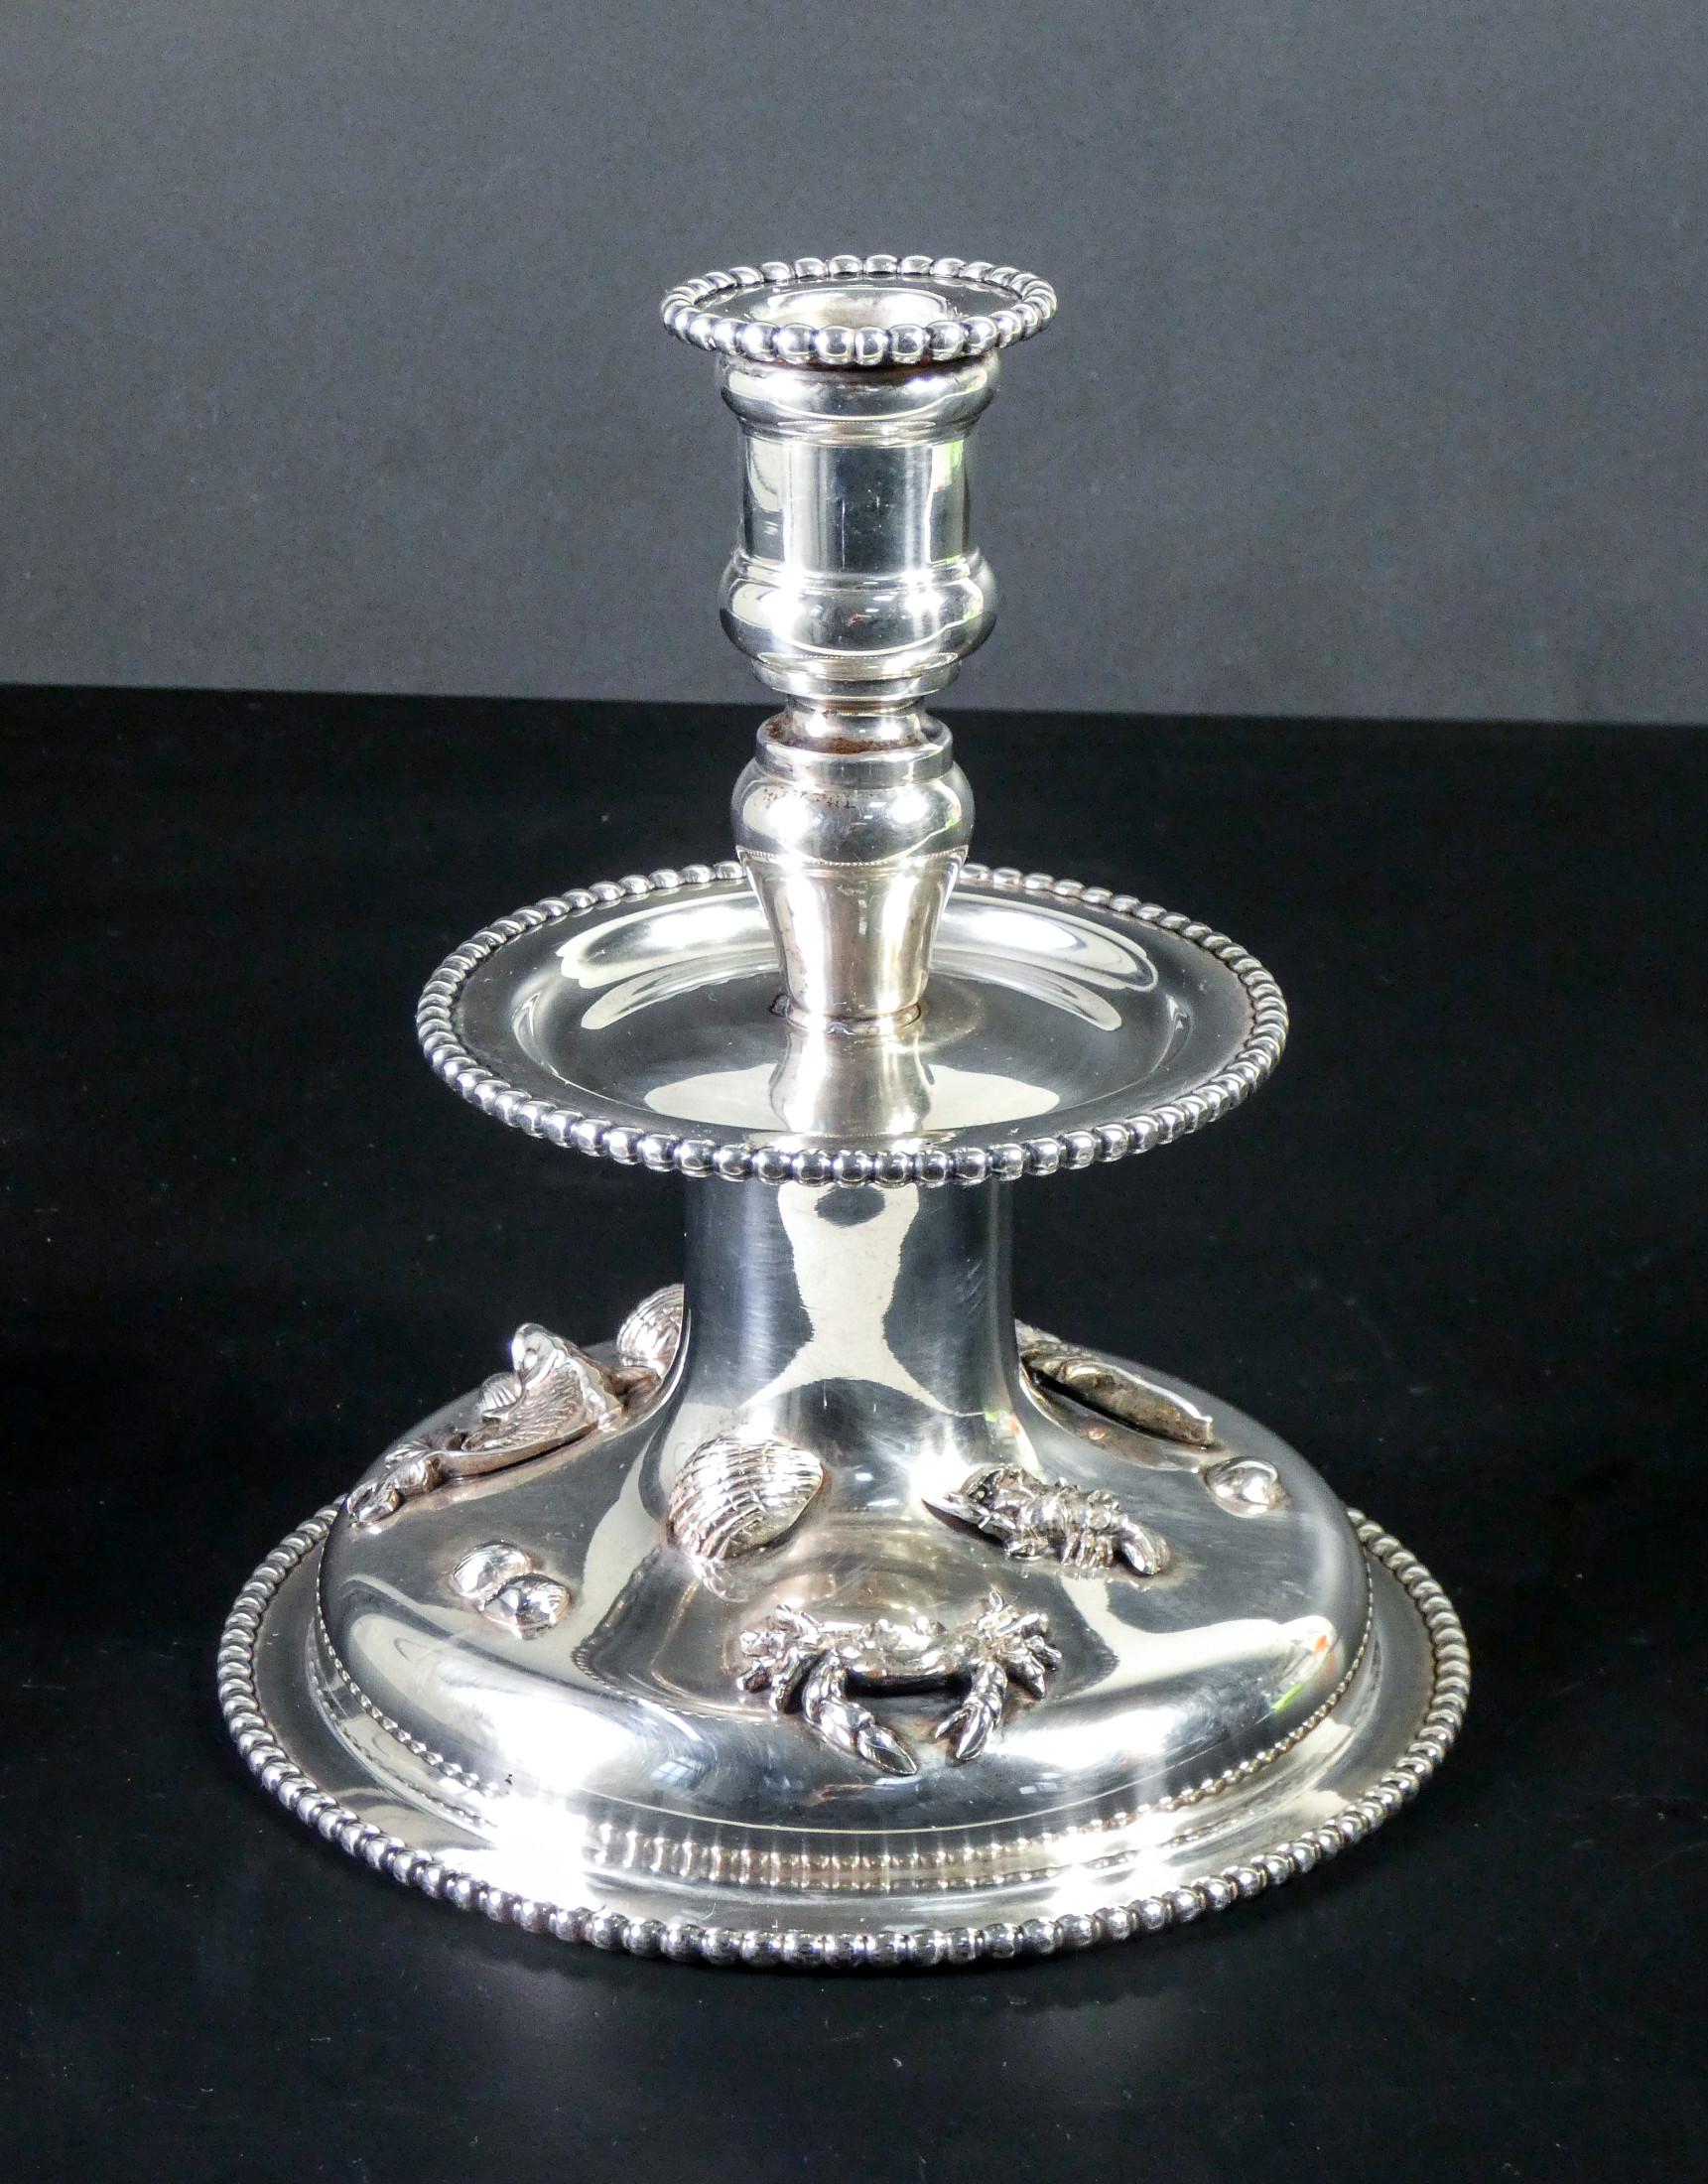 De Vecchi
silver candlestick decorated with small sculptures of marine animals

Origin
Milan, Italy

Period
First half of the twentieth century

Brand
DE VECCHI Milano
Massera

Model
Candlestick, candle holder

Materials
Silver